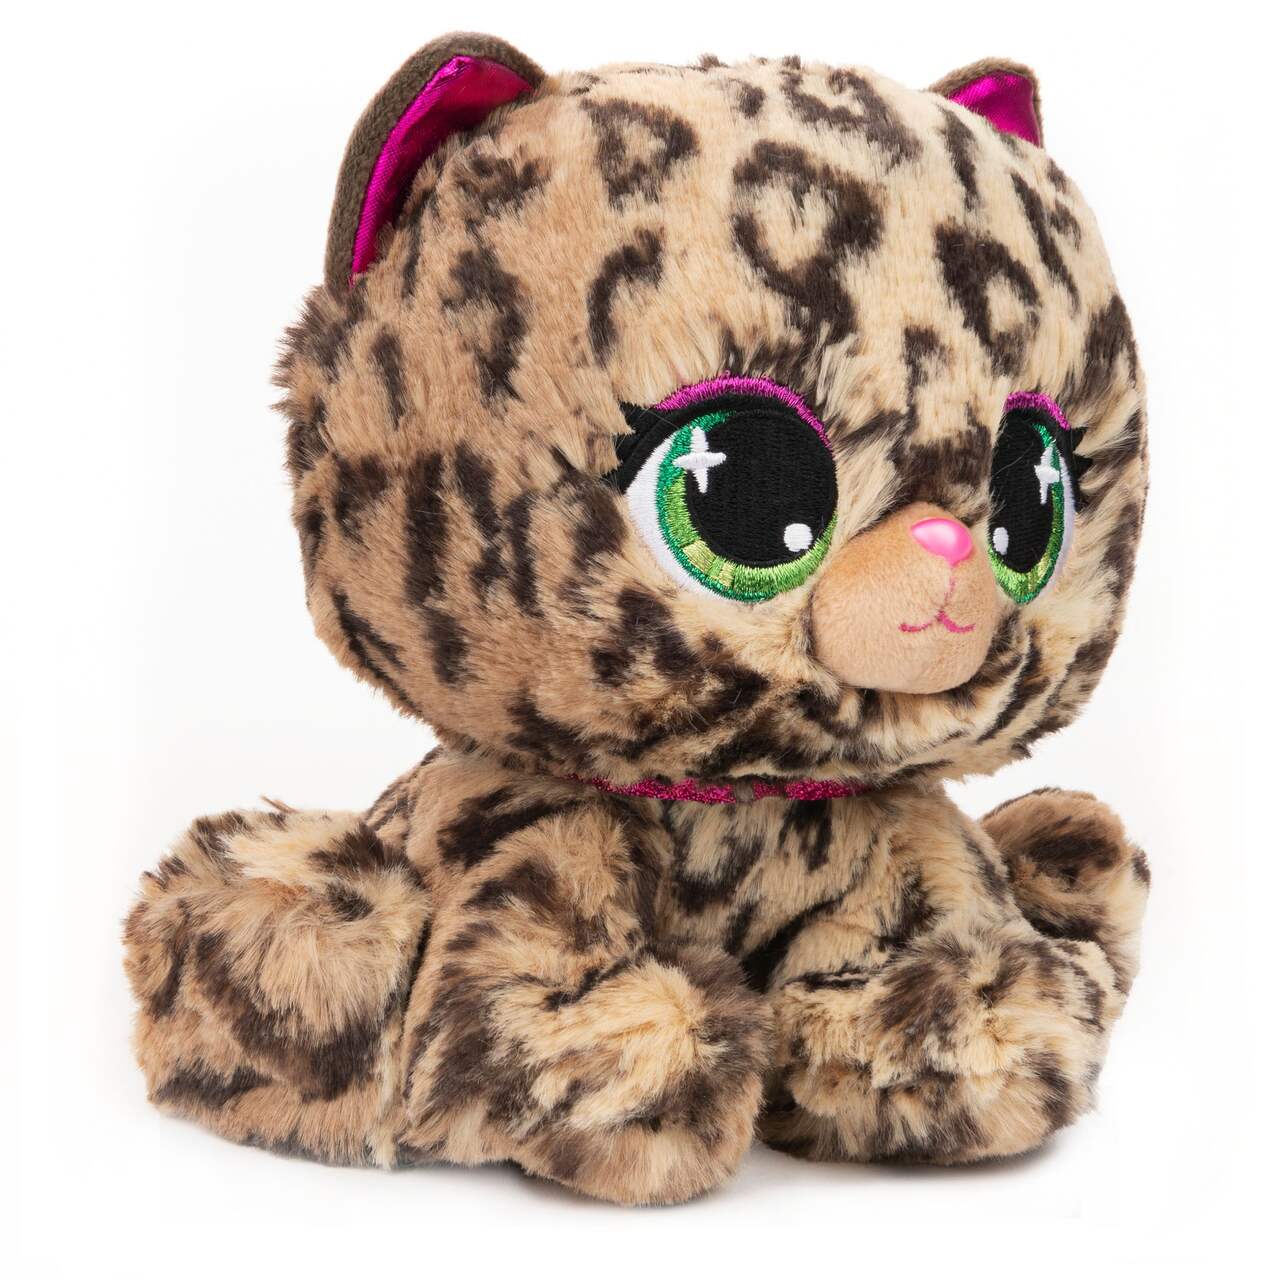 Ty Beanie Boos® Regular Recognizable Character Plush Animal Stuffed Toy,  Laney the Pink & Green Leopard, Ages 3+